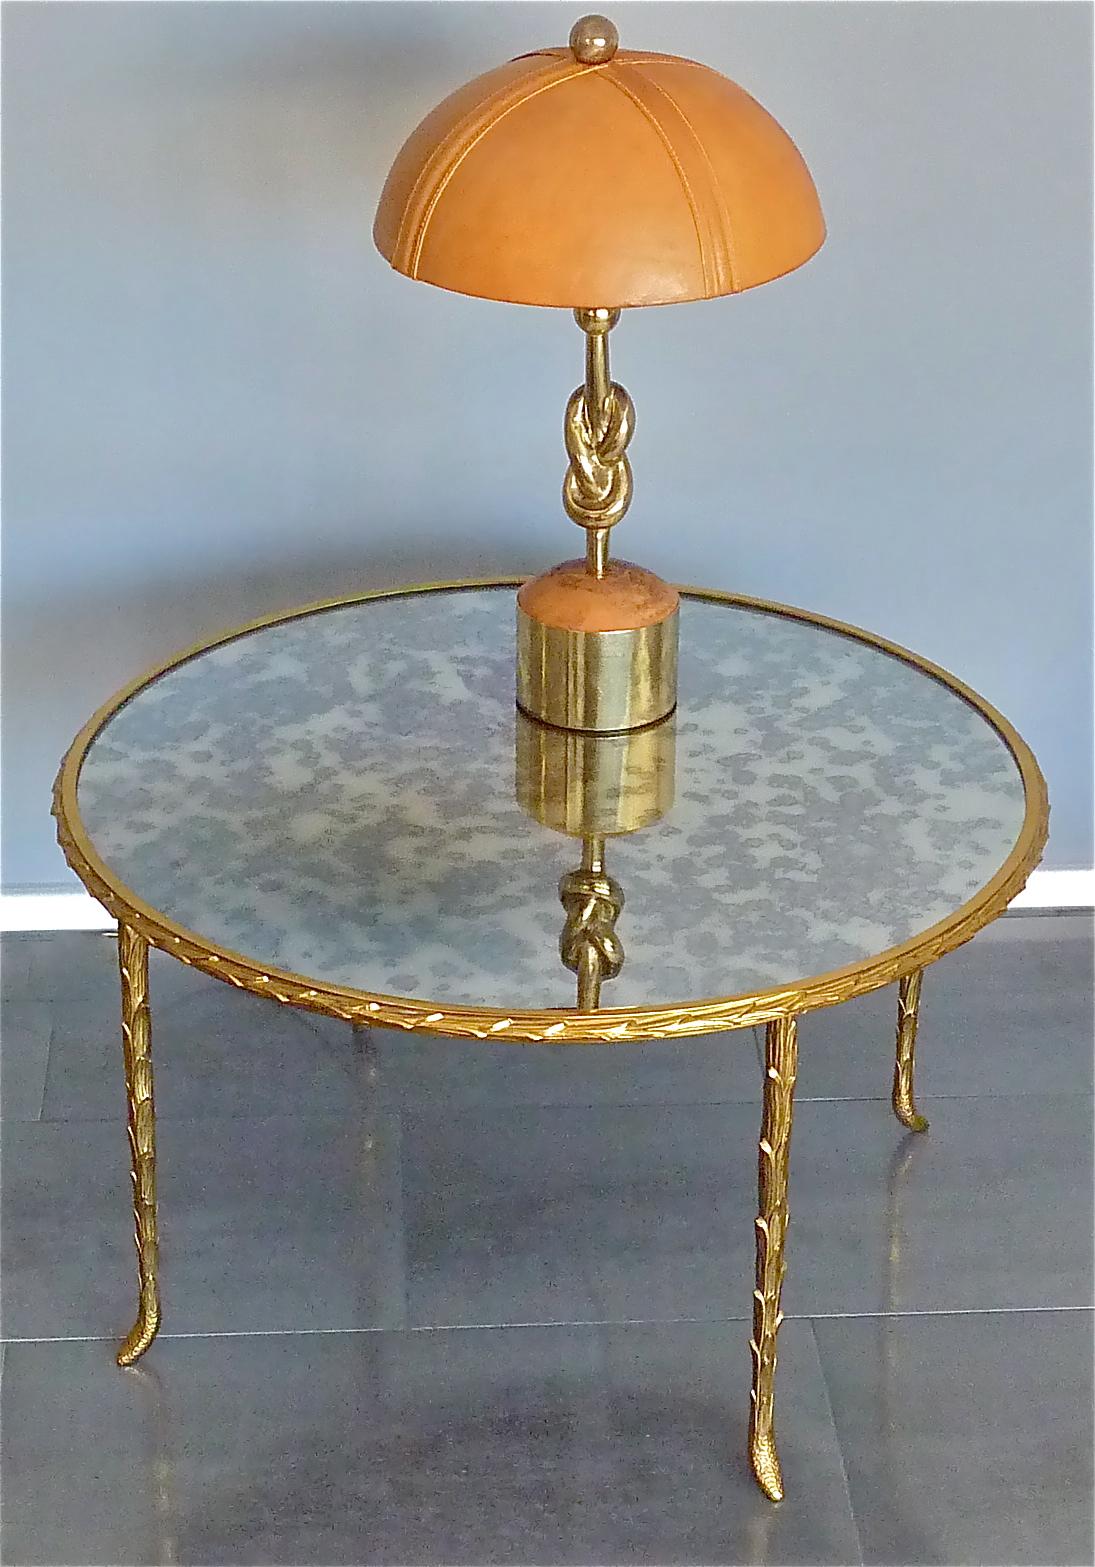 Mid-Century Modern Sculptural Gilt Bronze Leather Knotted Table Lamp French 1970s Jansen Pergay Era For Sale